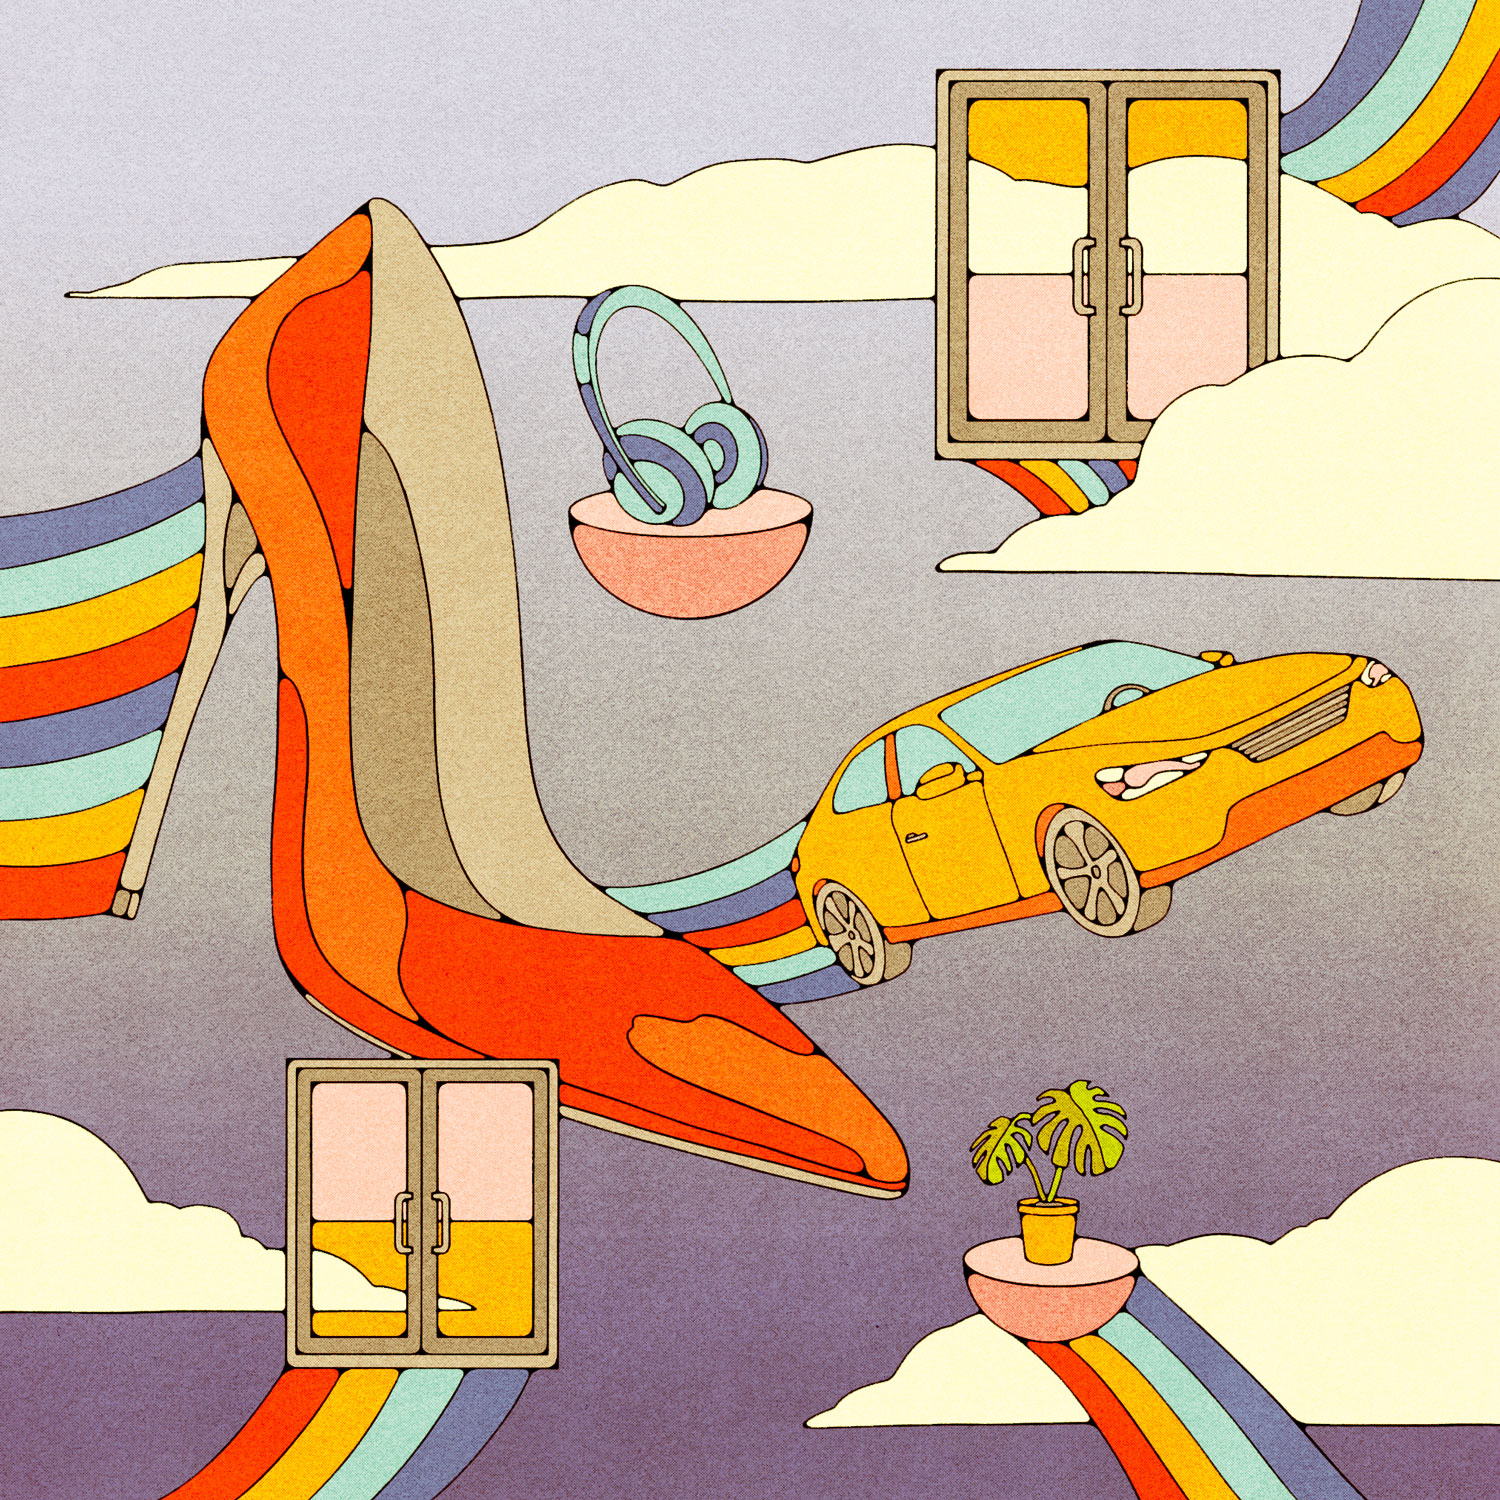 An illustration of a shoe, a car and rainbows